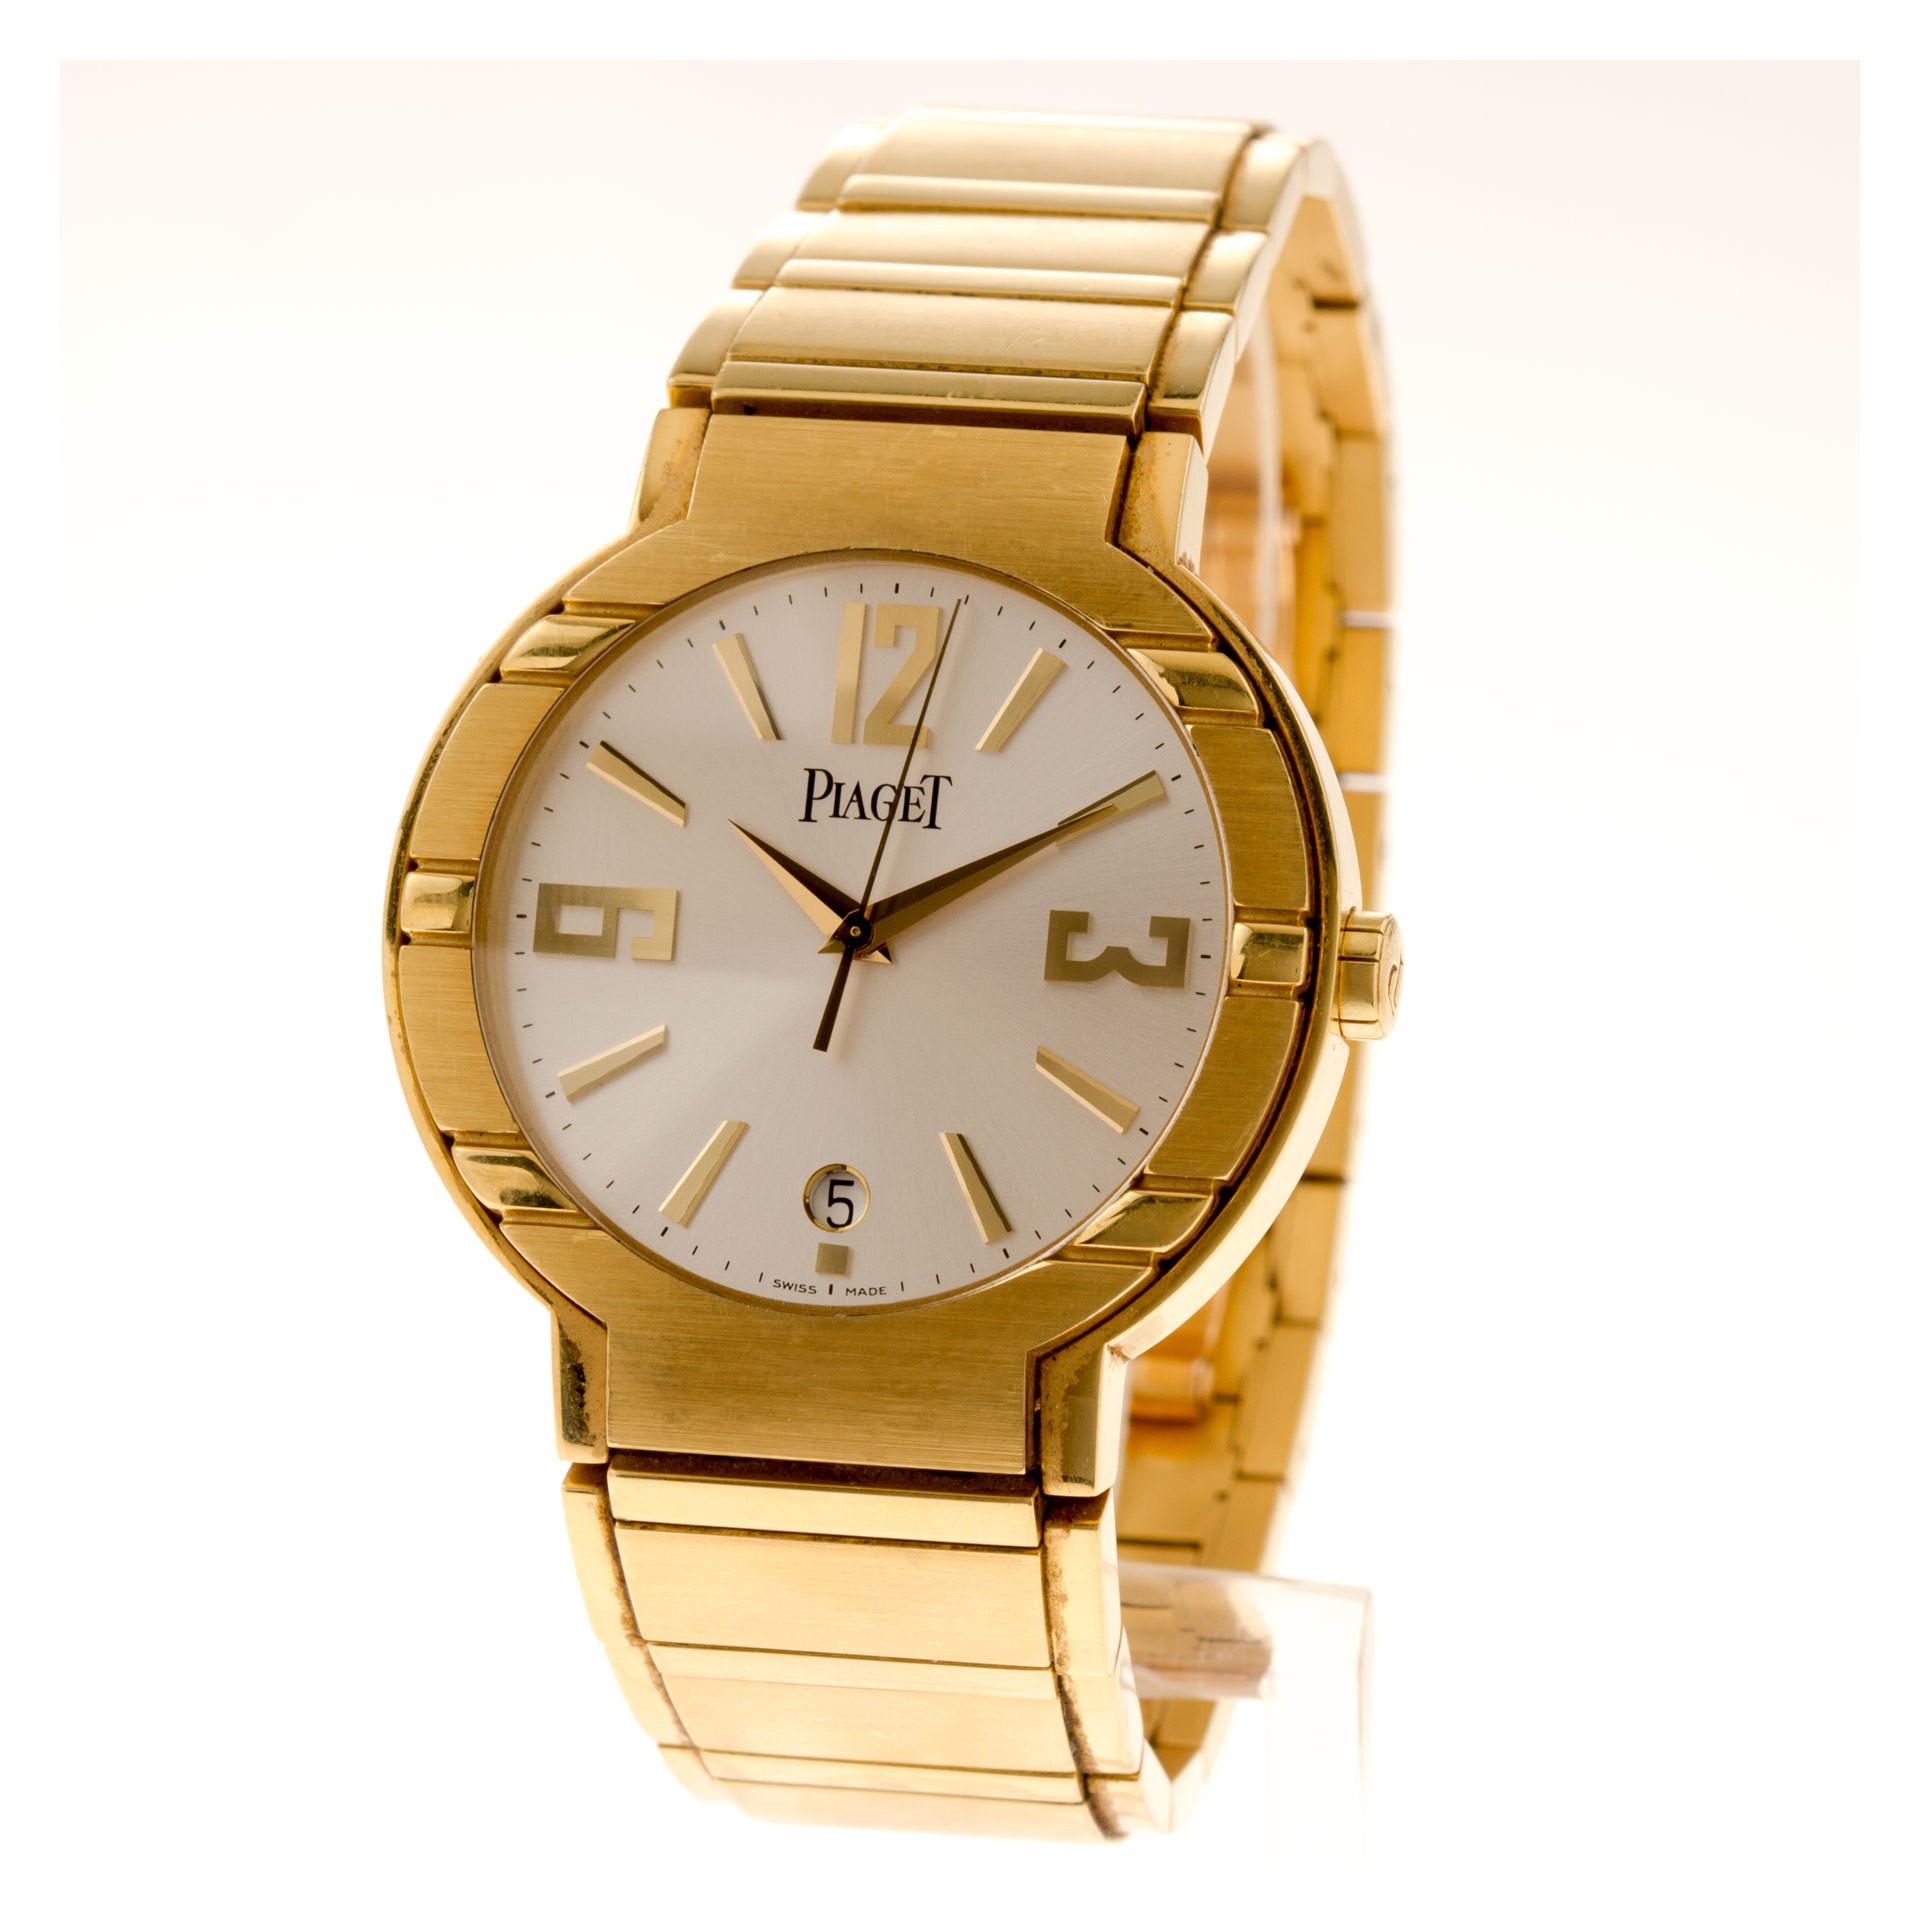 Piaget Polo in Yellow Gold